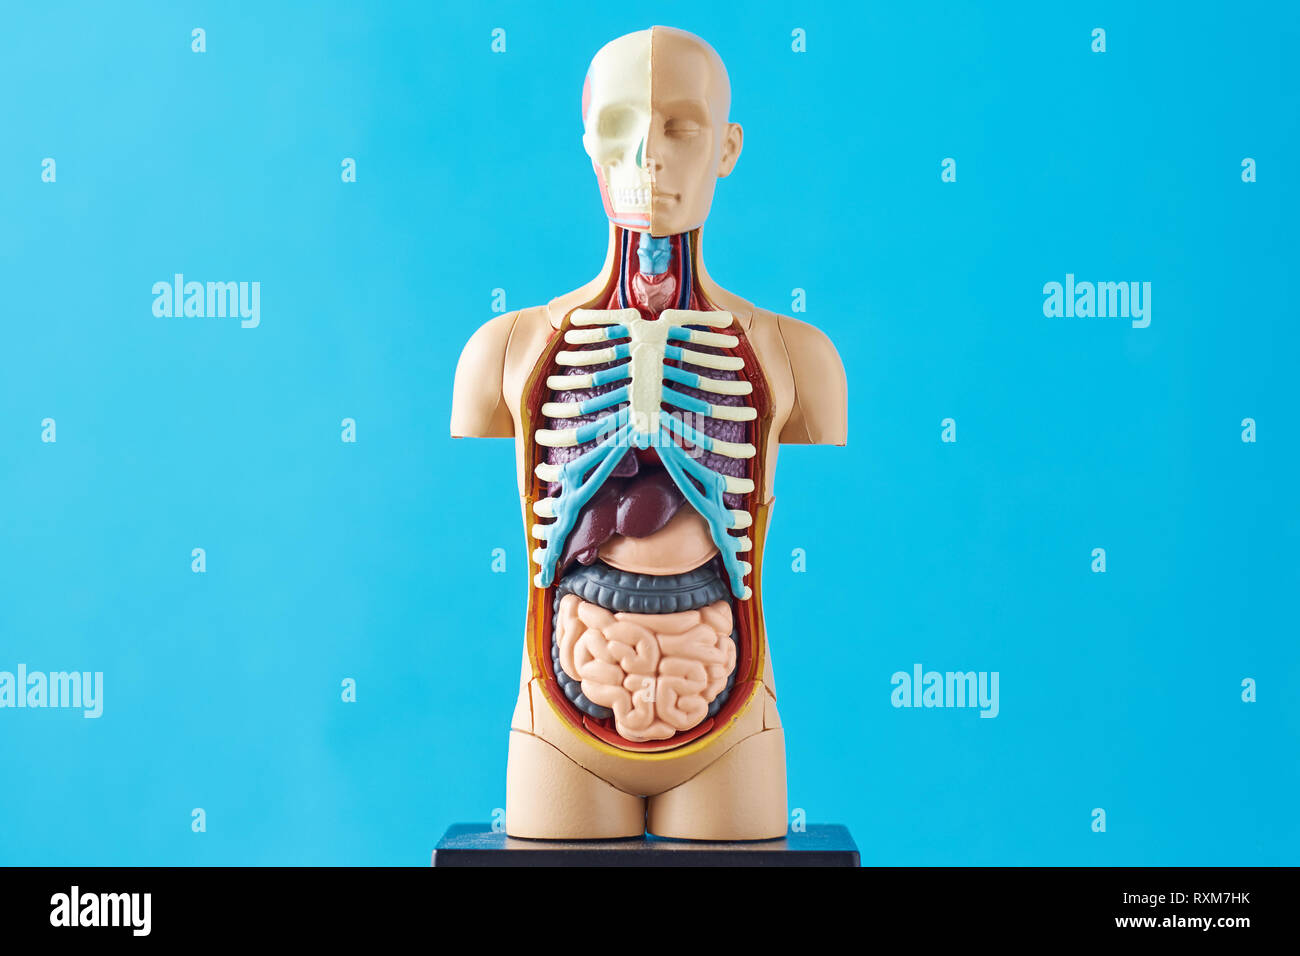 Human anatomy mannequin with internal organs on blue background Stock Photo  - Alamy